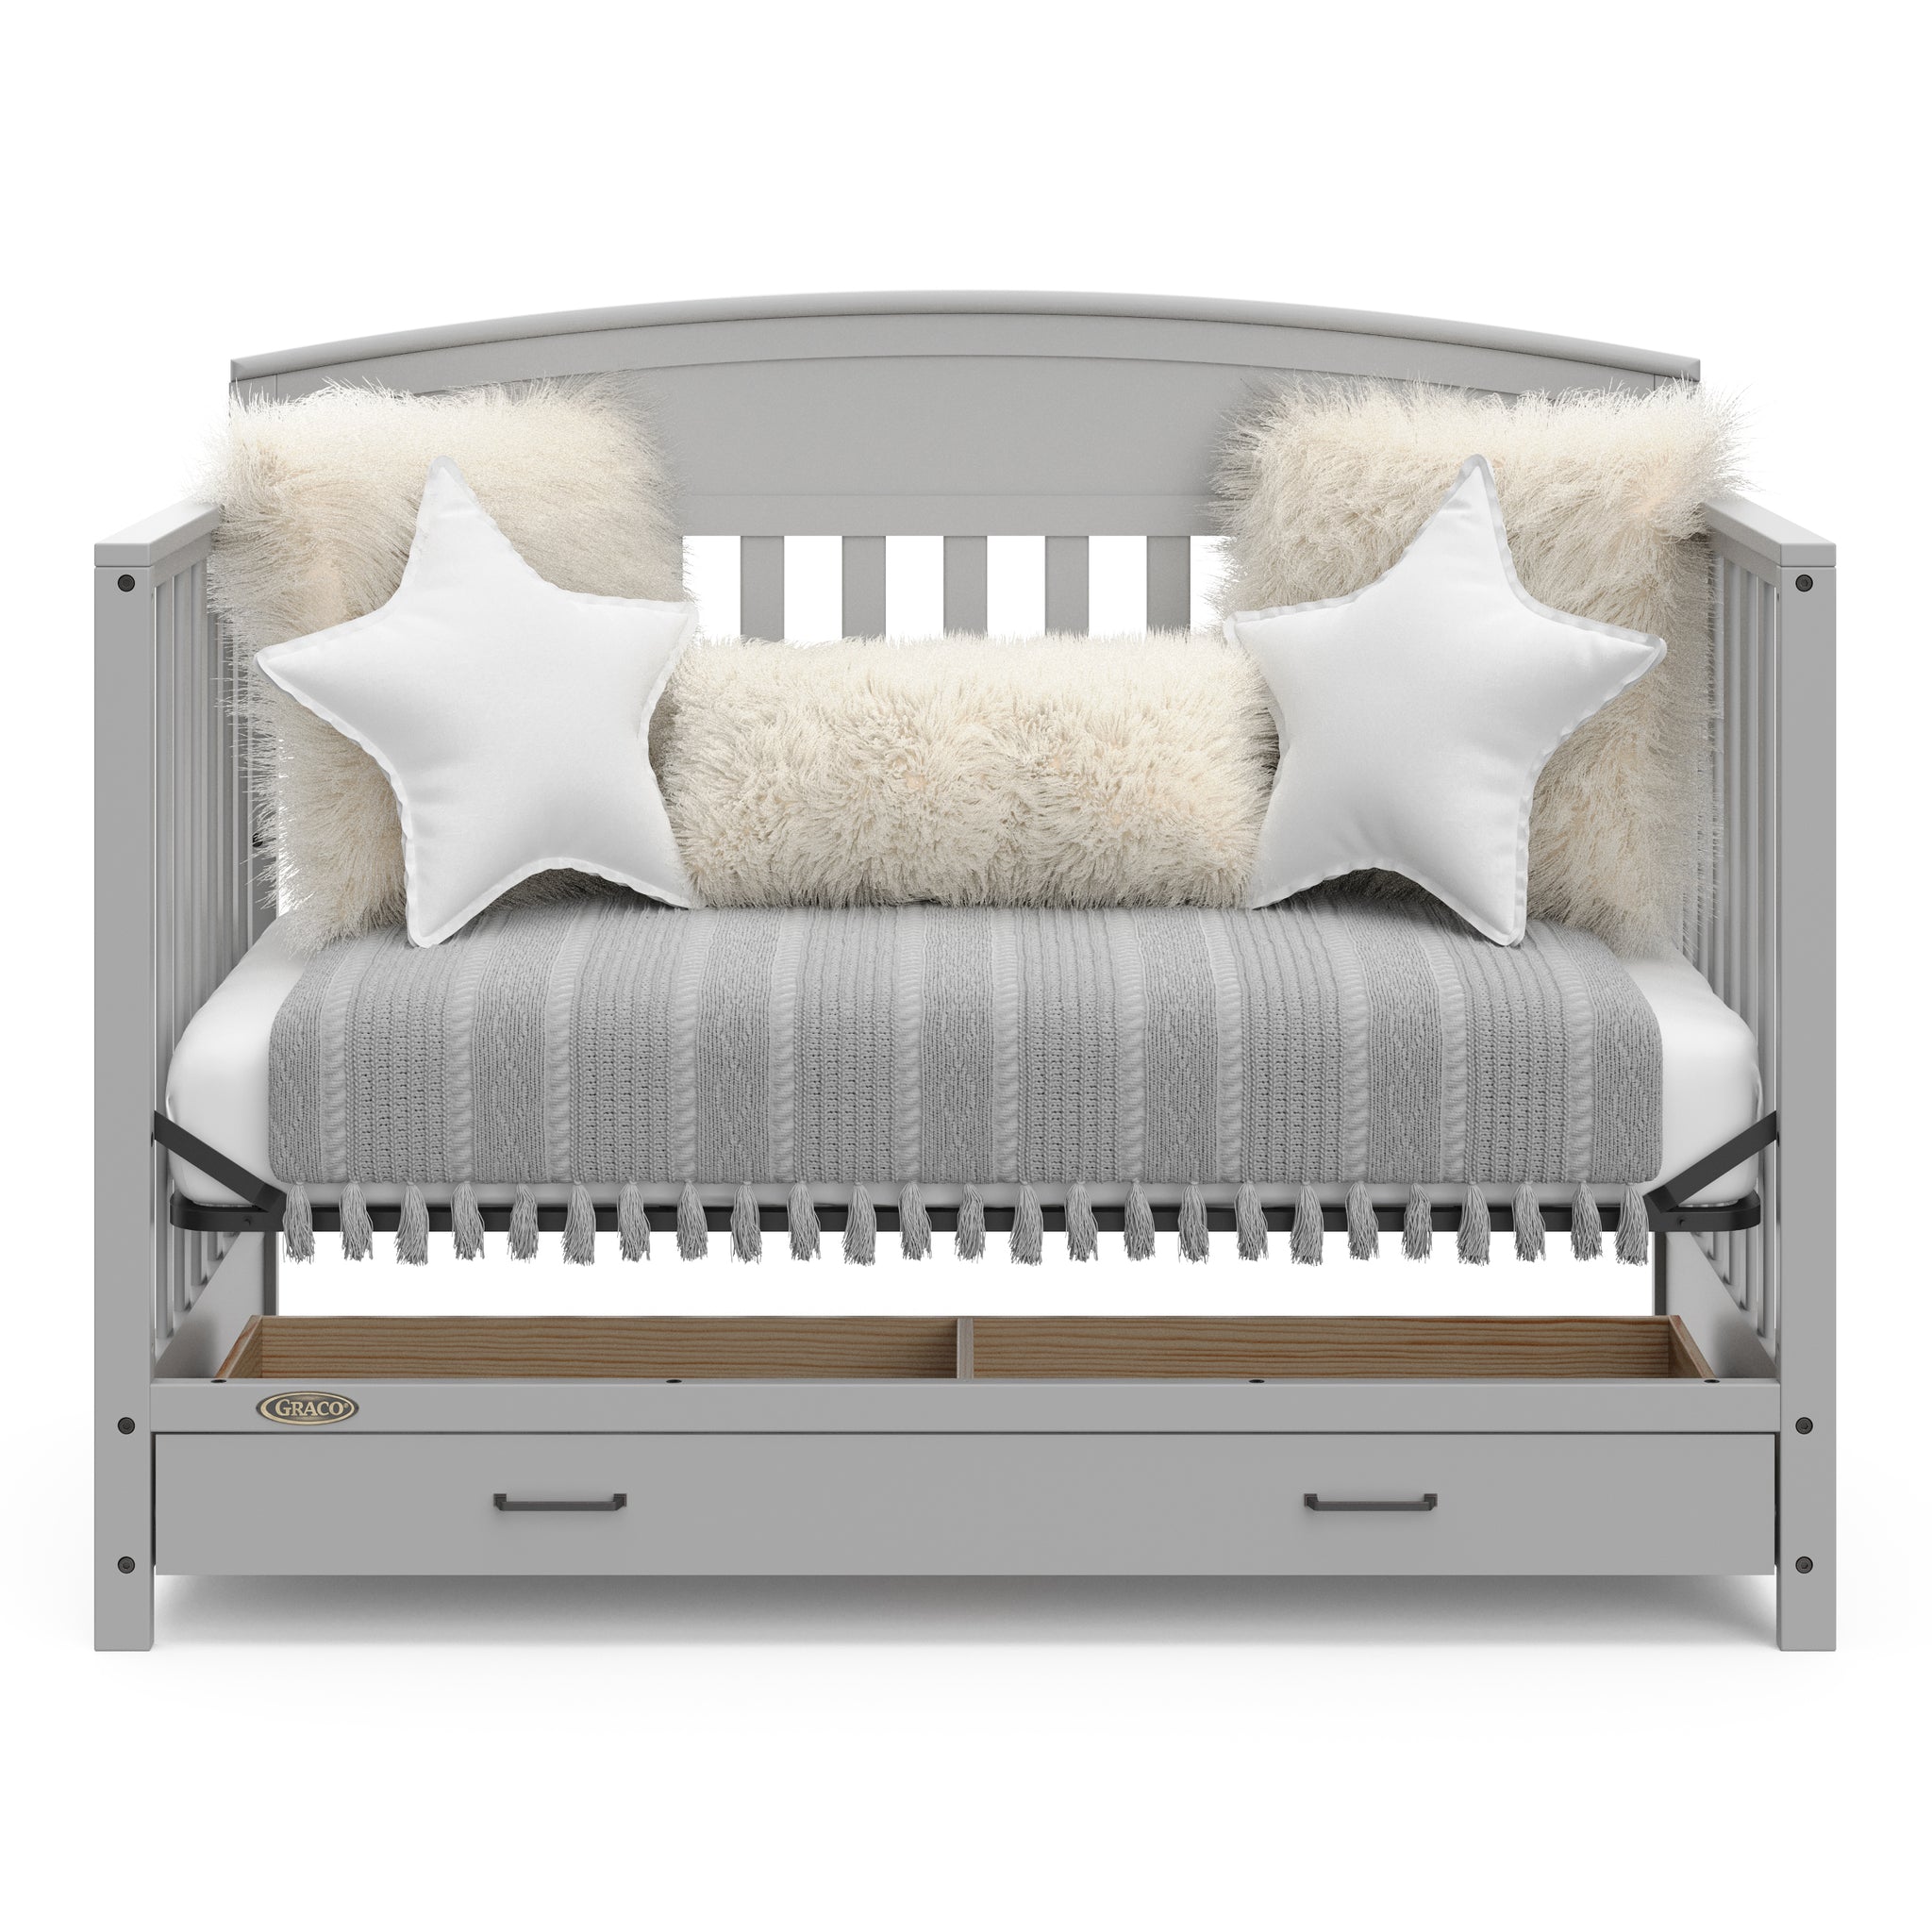 Pebble gray crib with drawer in daybed conversion